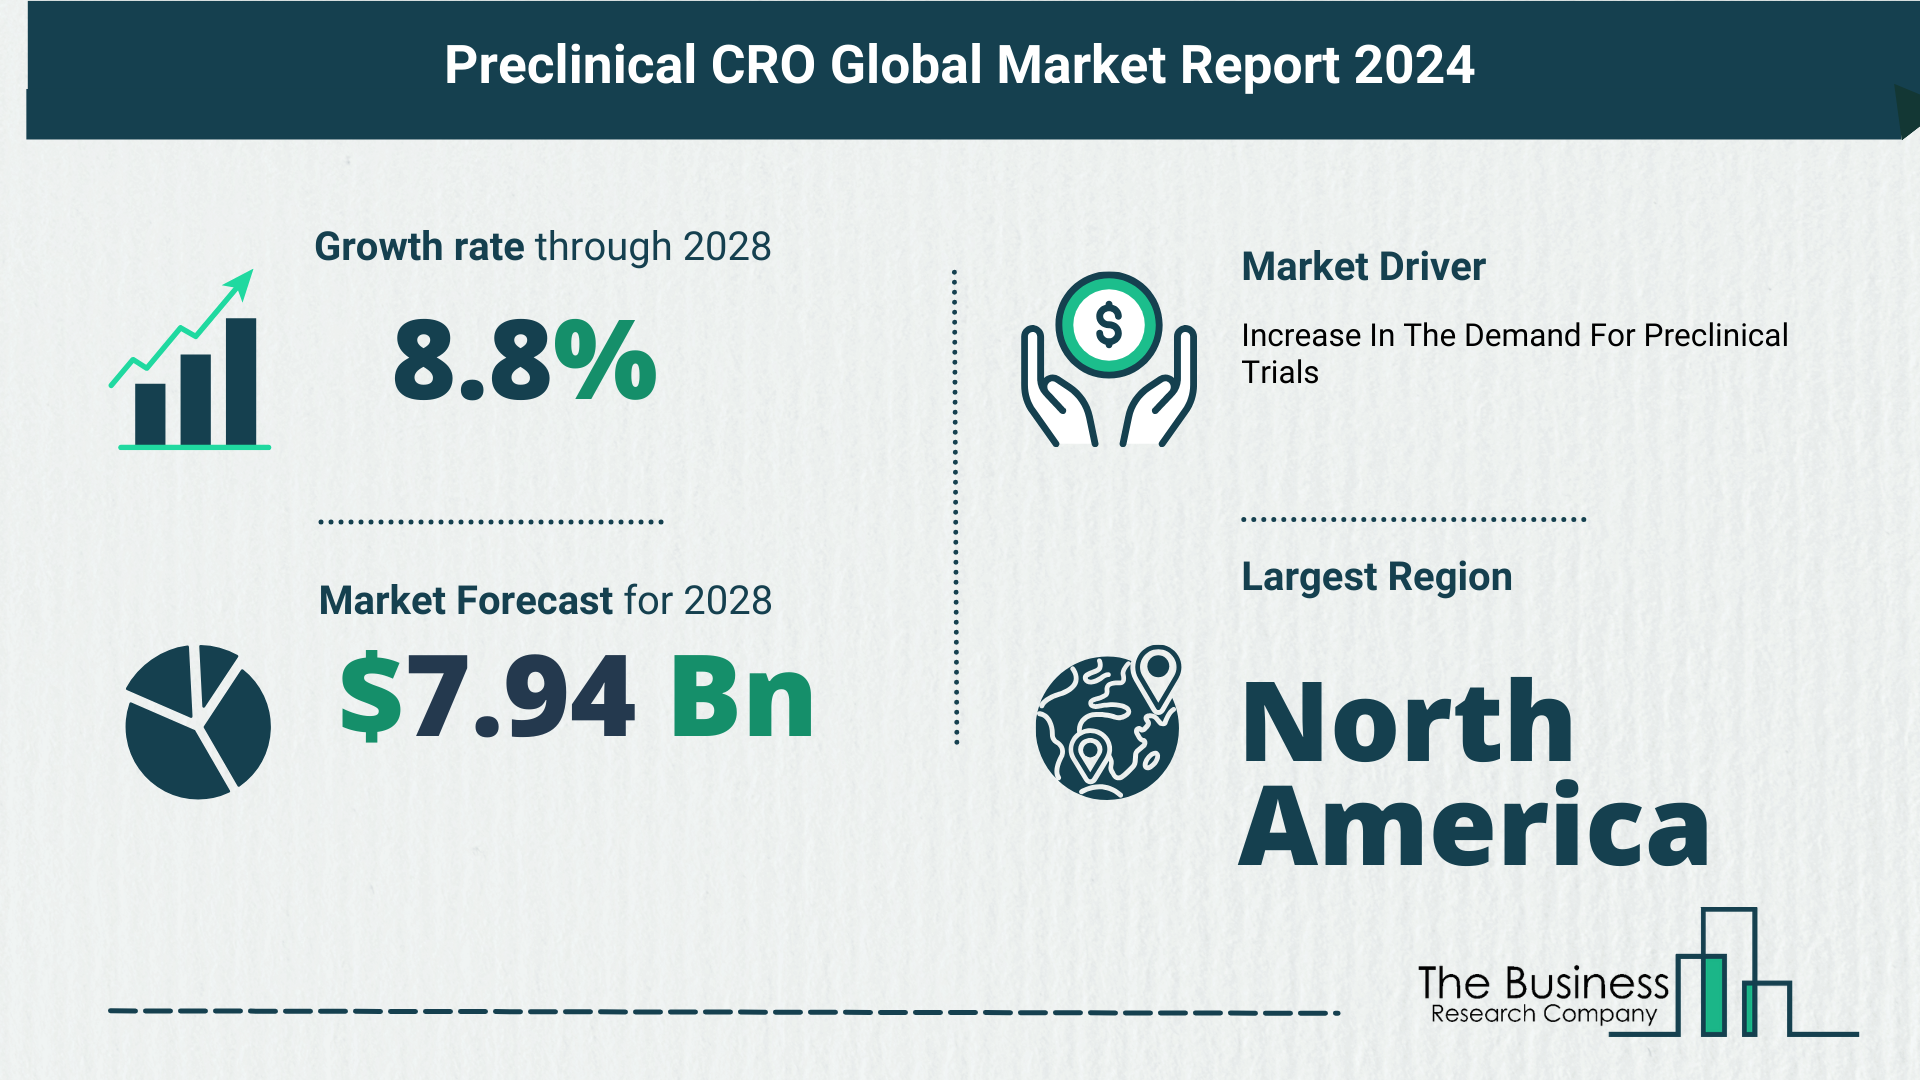 Top 5 Insights From The Preclinical CRO Market Report 2024